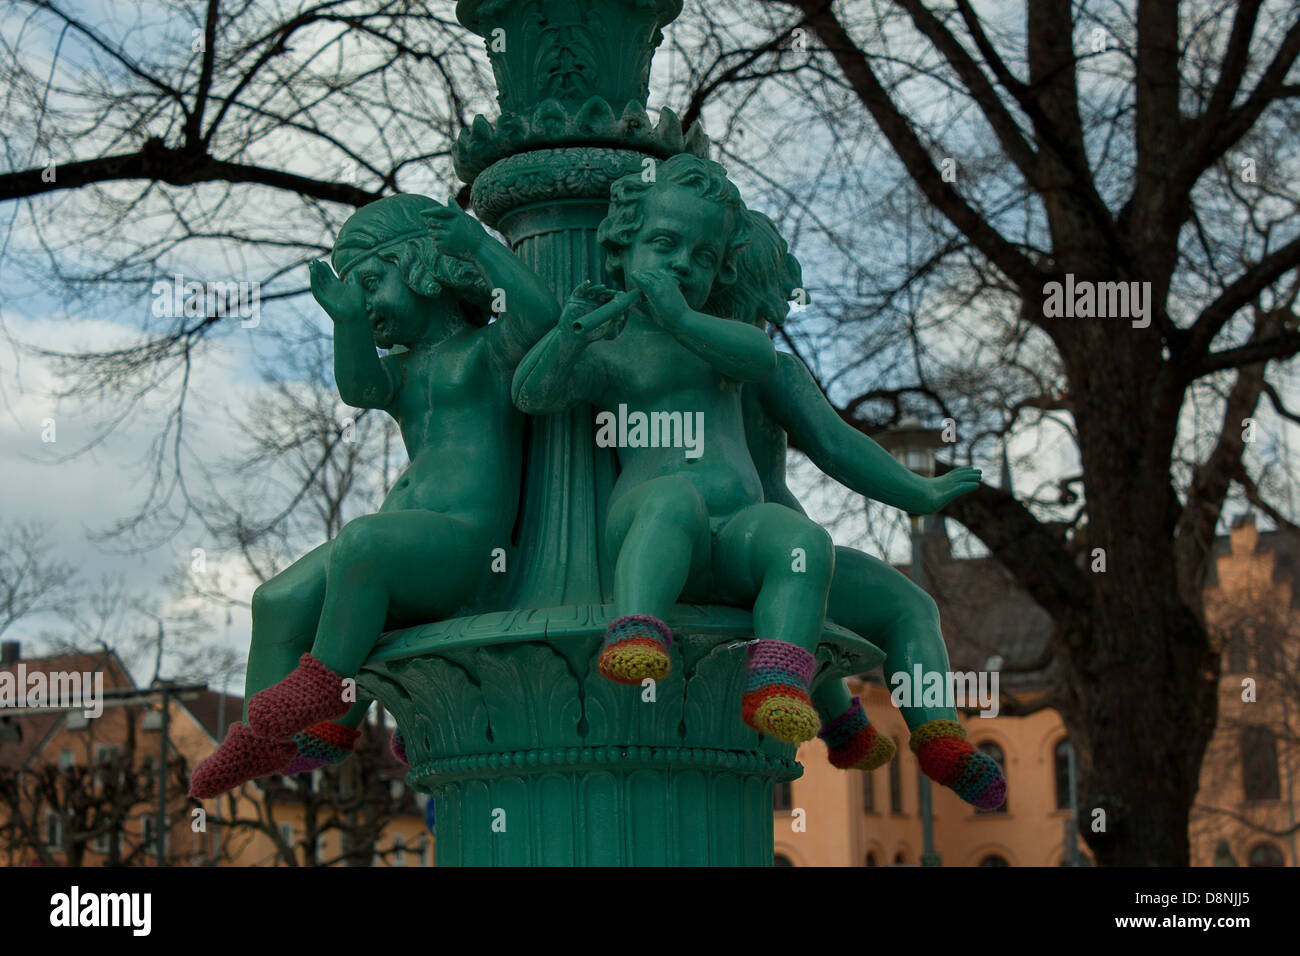 A statue in the city garden of Uppsala. Their feet's are warmed by socks knitted by a anonymous source. Stock Photo